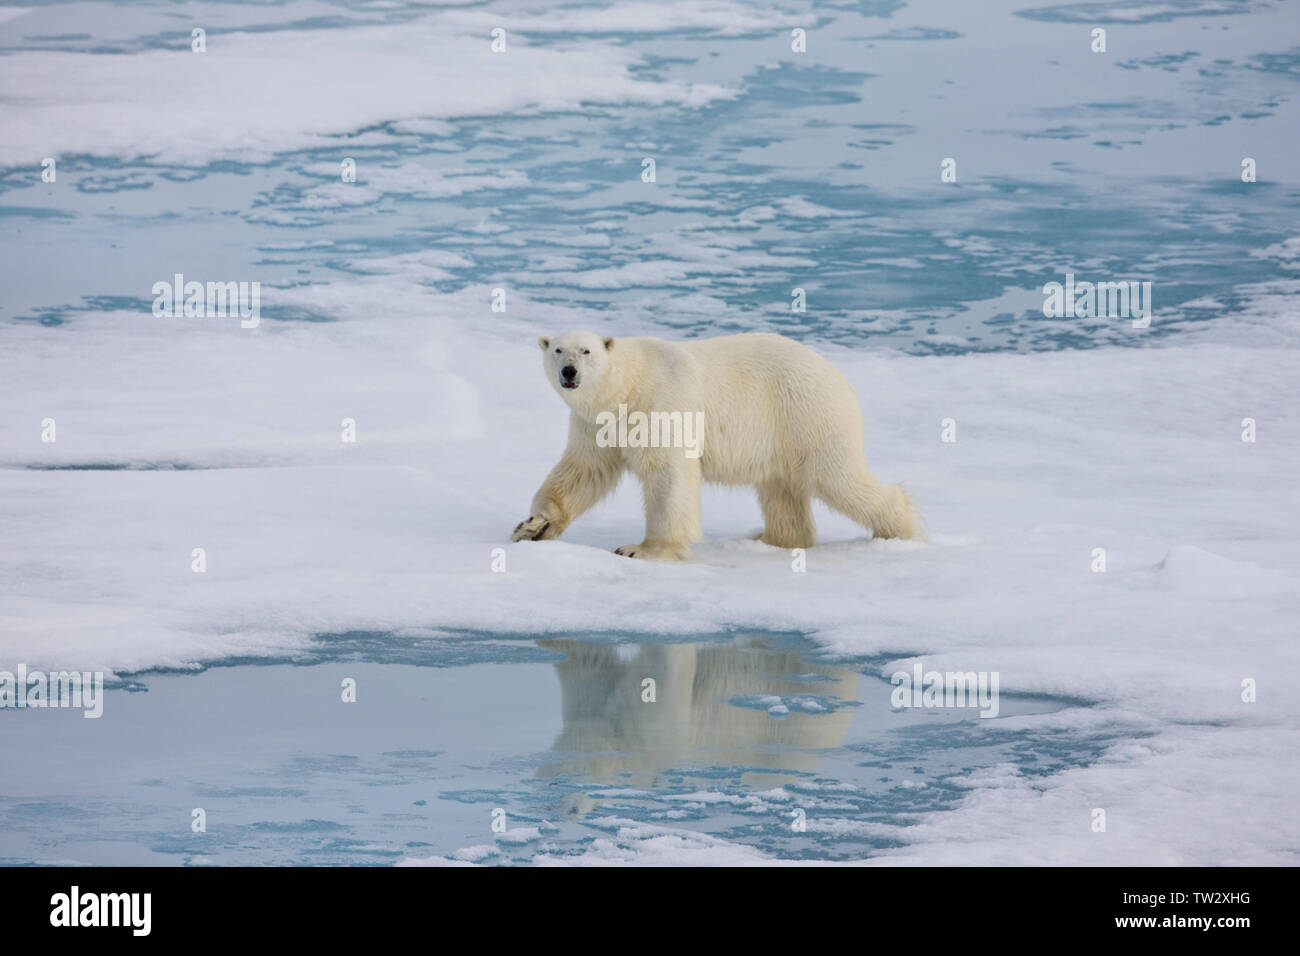 Male polar bear with scars, in Russian Arctic. Stock Photo